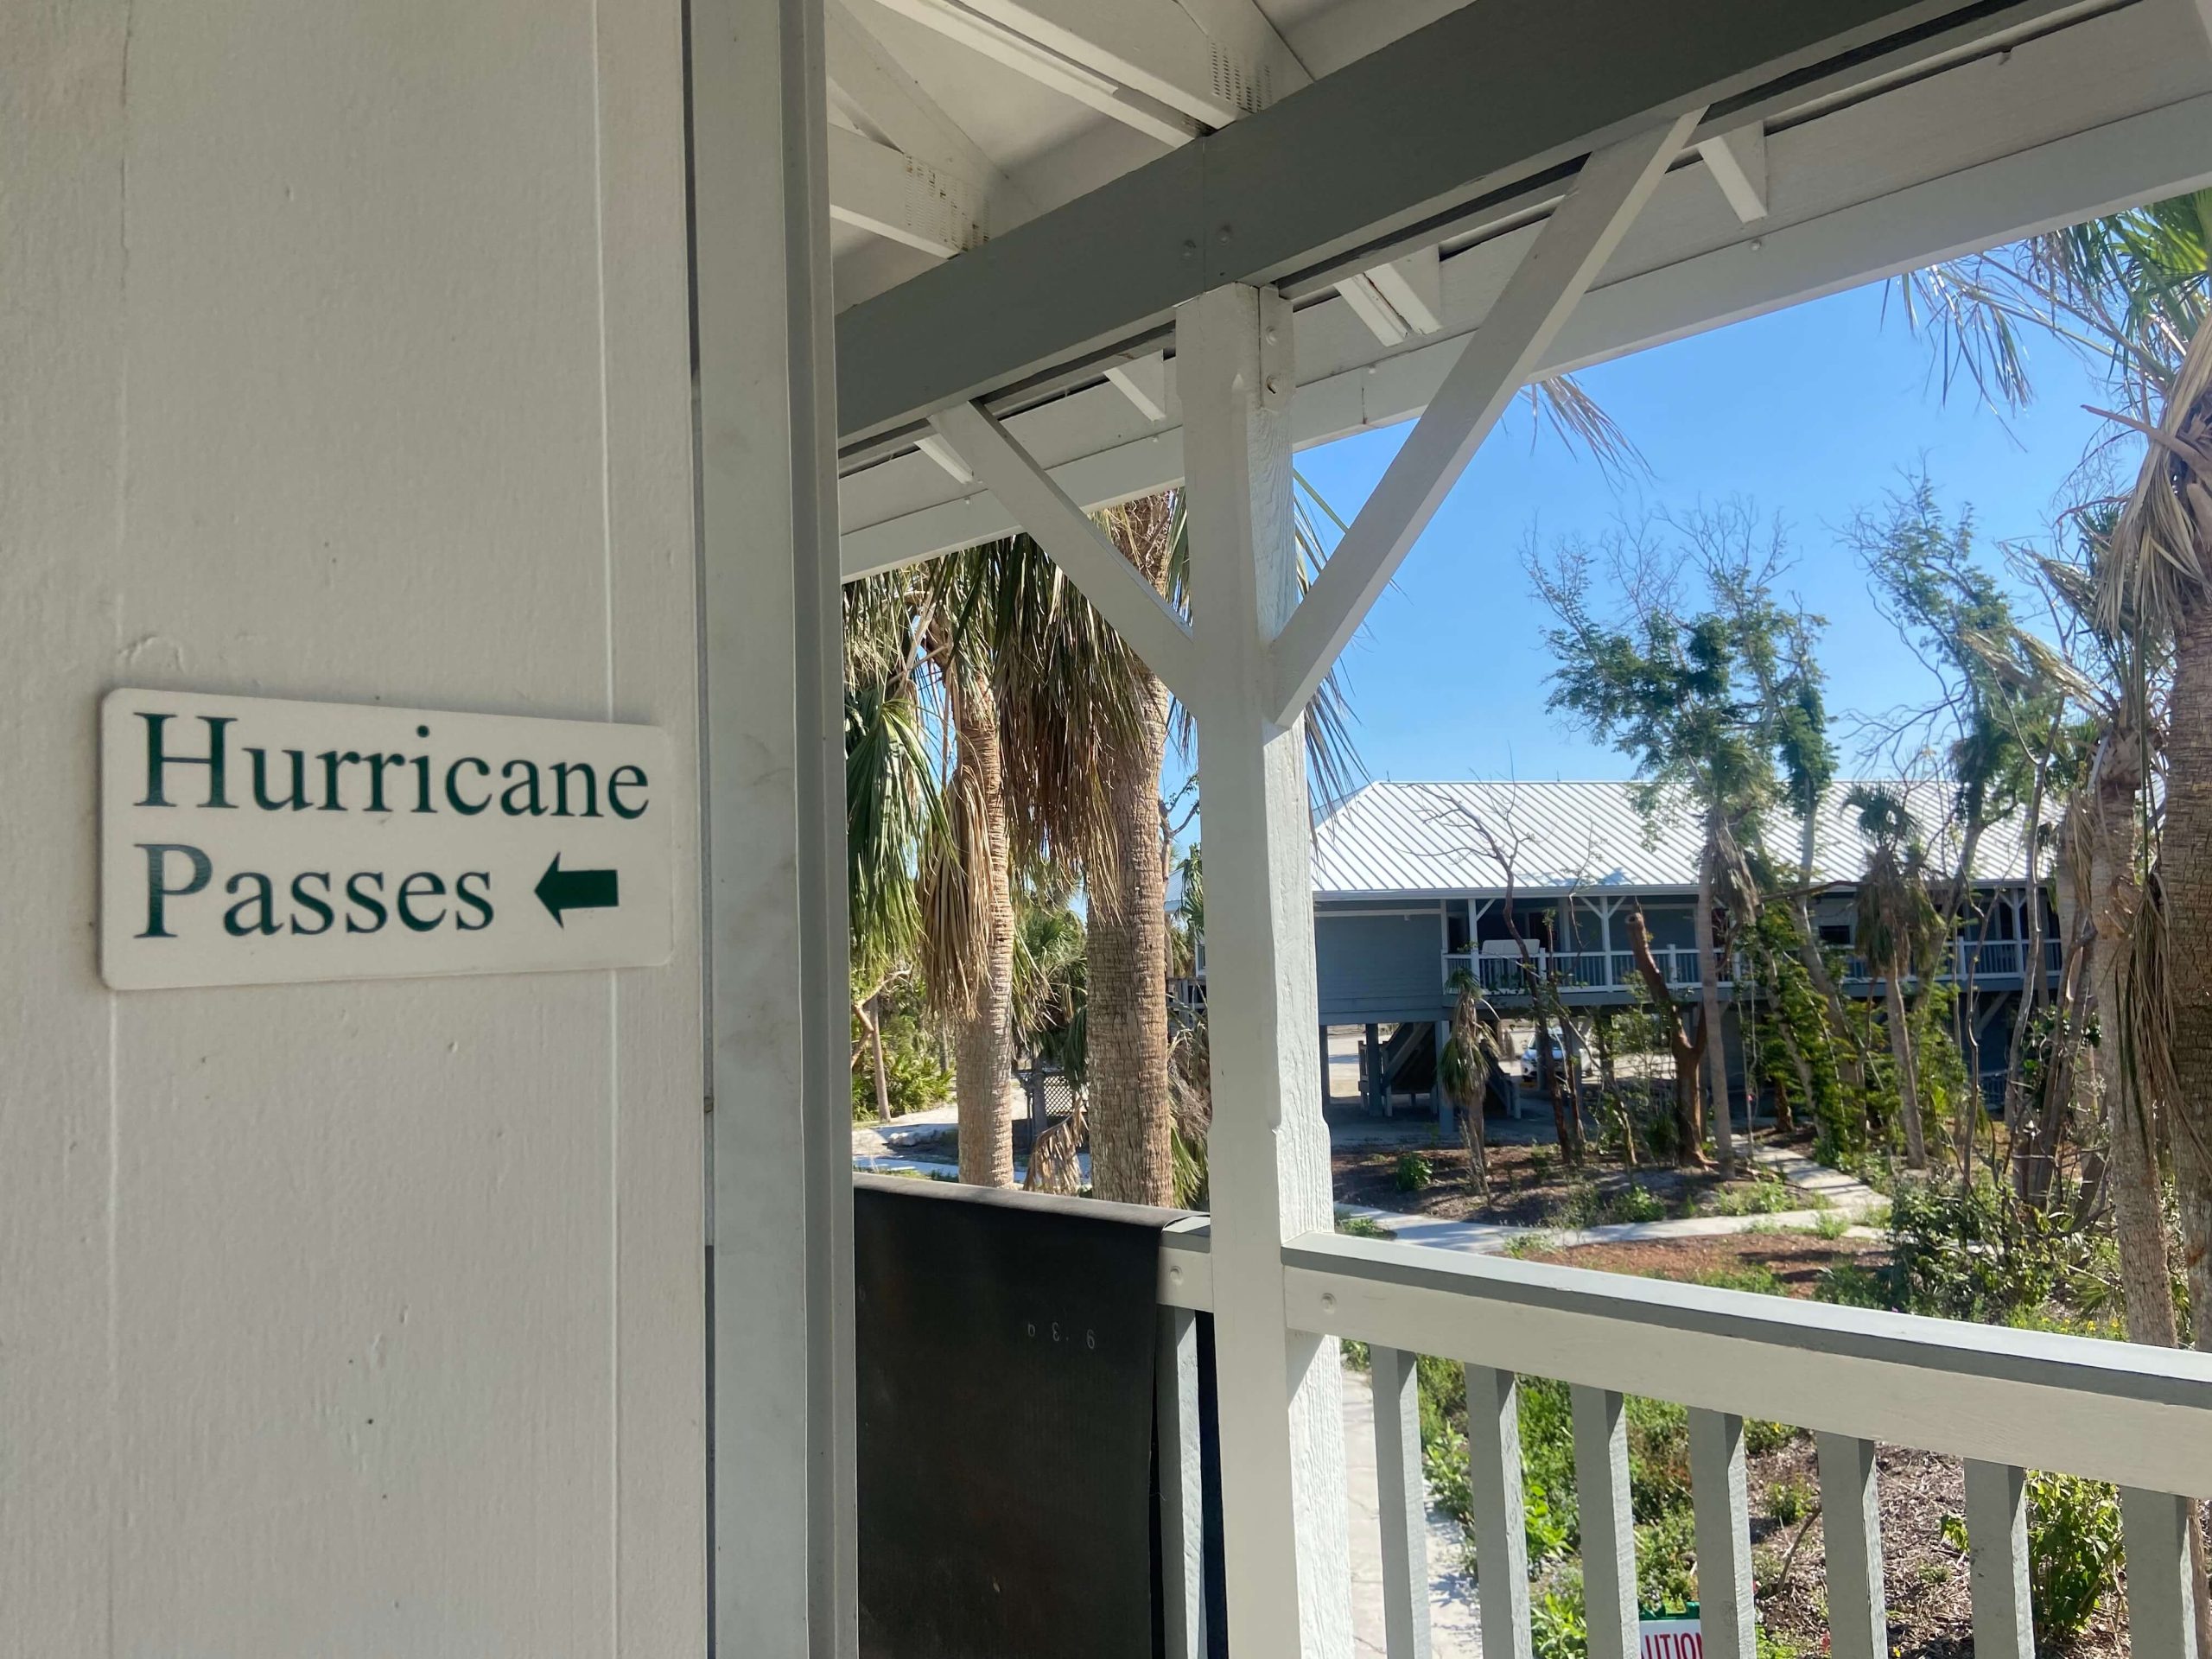 A white sign with black letters that reads “Hurricane Passes” hangs outside Sanibel City Hall. The damage from Hurricane Ian’s wind can be seen in the battered trees in the background. Sanibel officials limited access to the wealthy community by issuing hurricane passes to workers involved in the recovery effort. (María Inés Zamudio/ Center for Public Integrity)